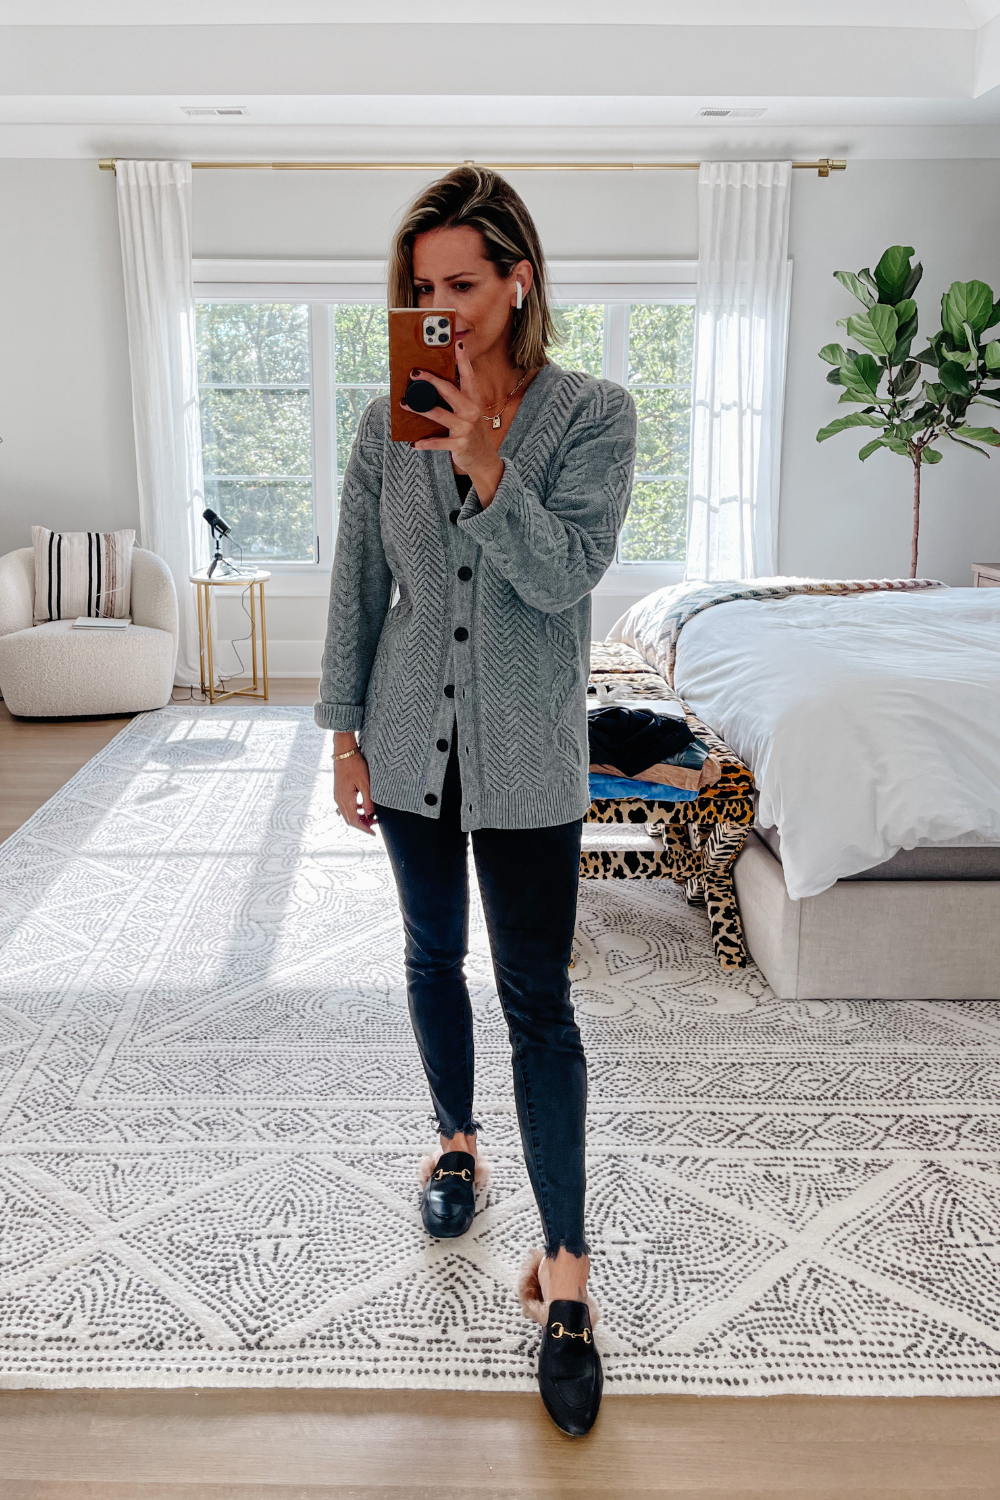 Suzanne wearing a grey sweater, black denim, and mules